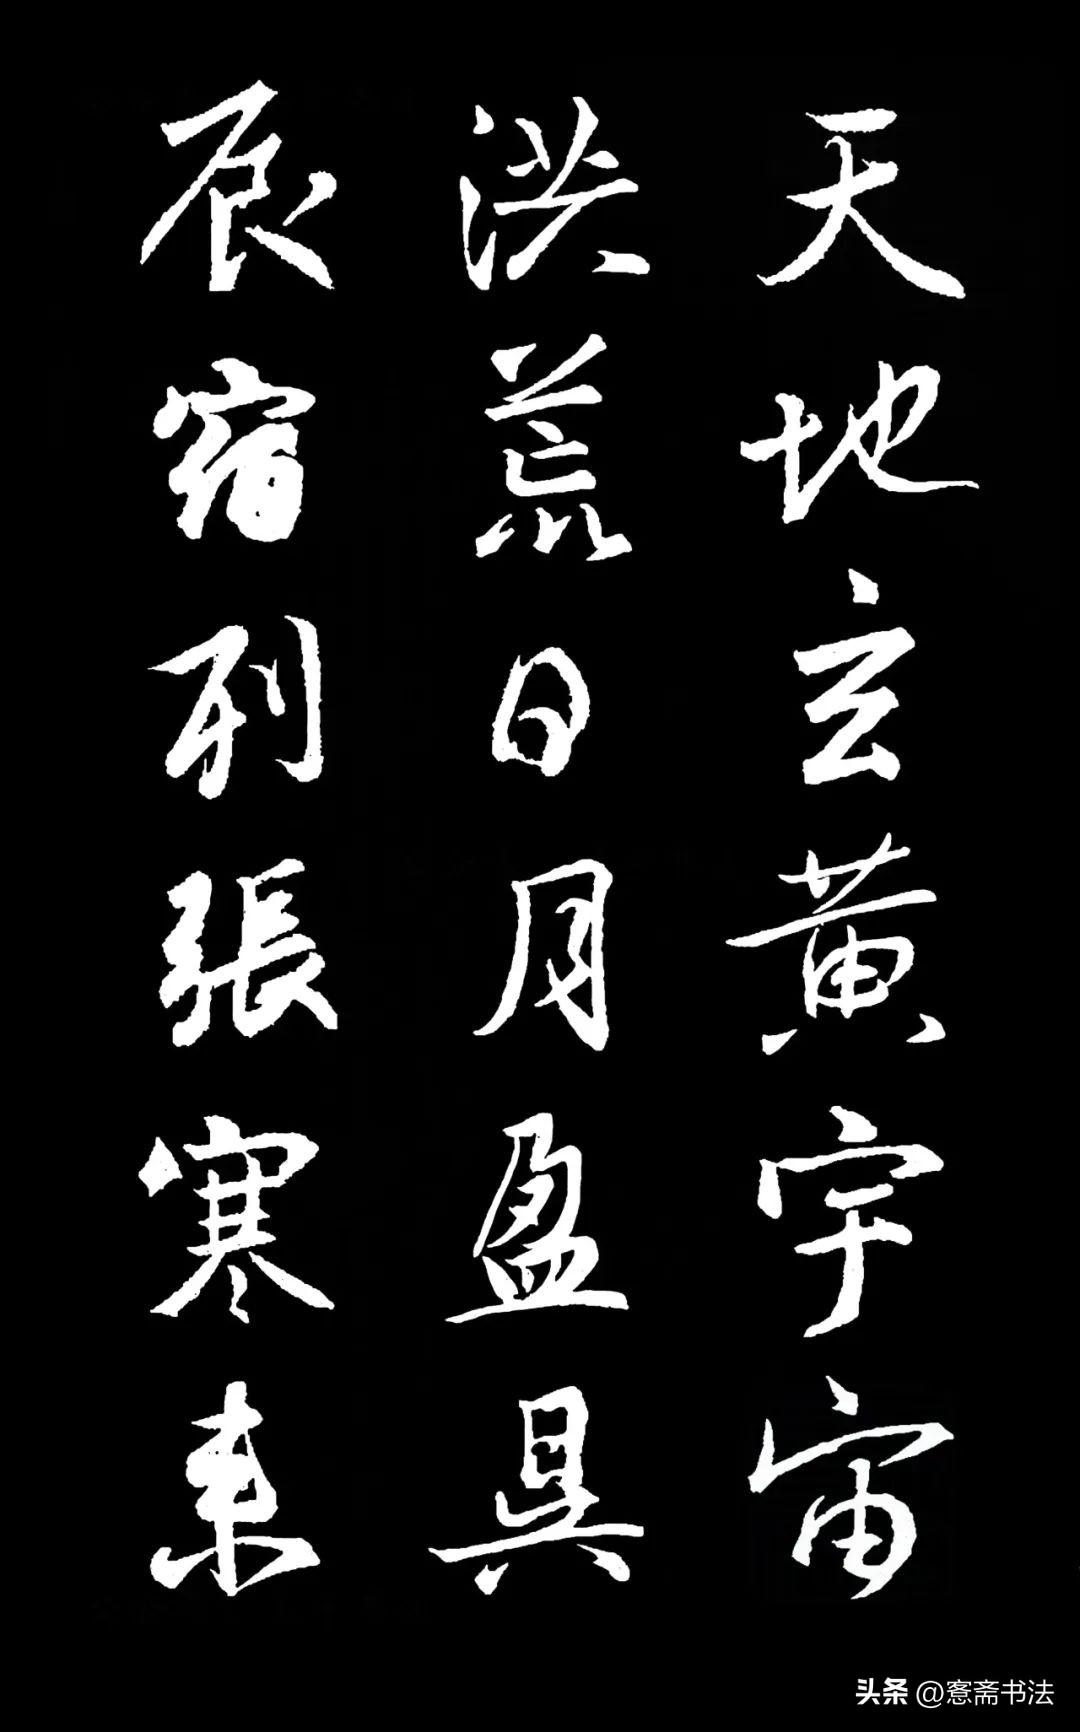 Collection of Chinese Calligraphers of Past Dynasties: Wang Xizhi's "Collection of Thousand Characters" 1000 cursive fonts